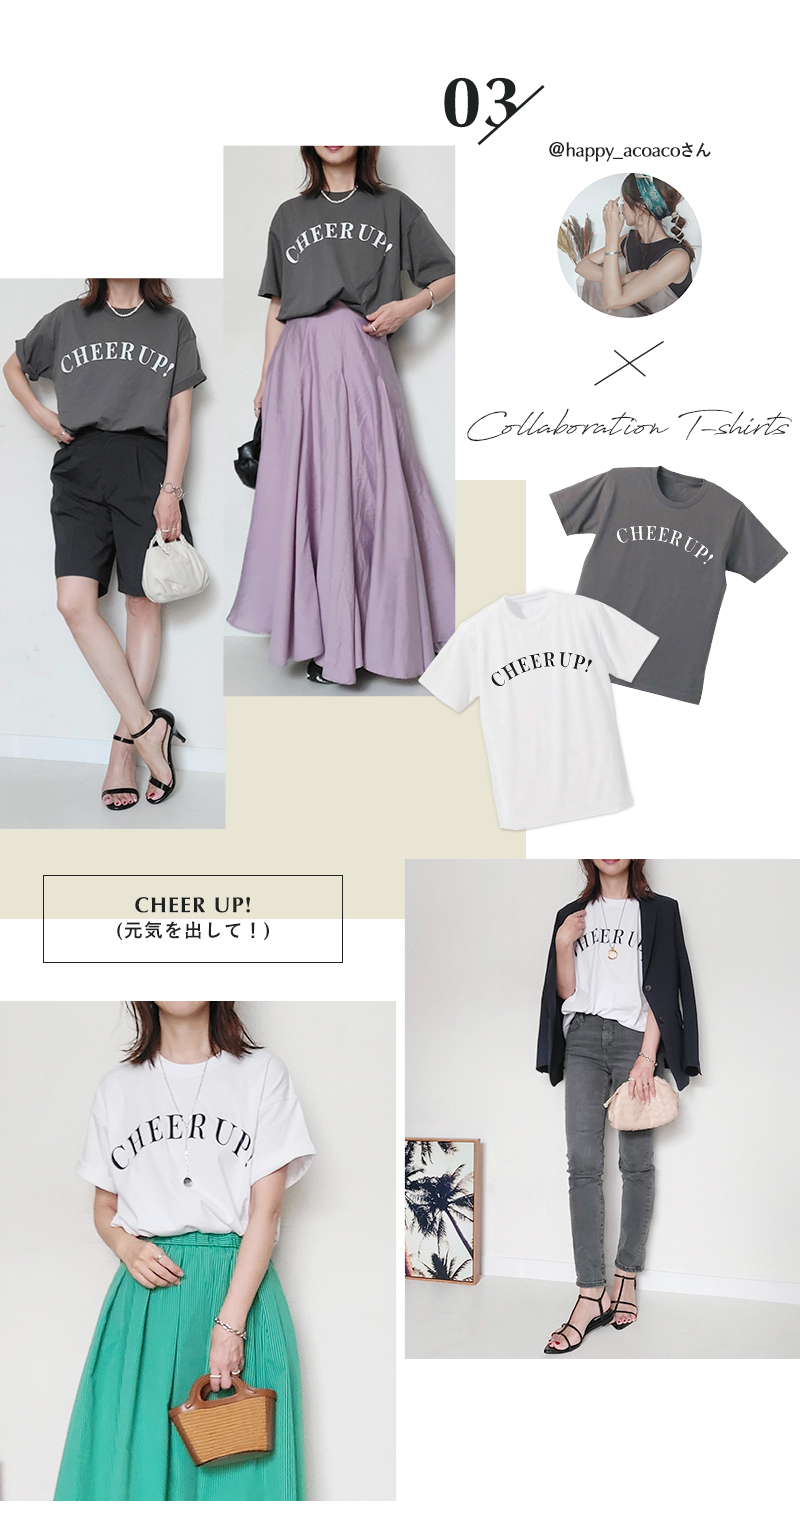 Influencer×COTORICA Collaboration T-shirts